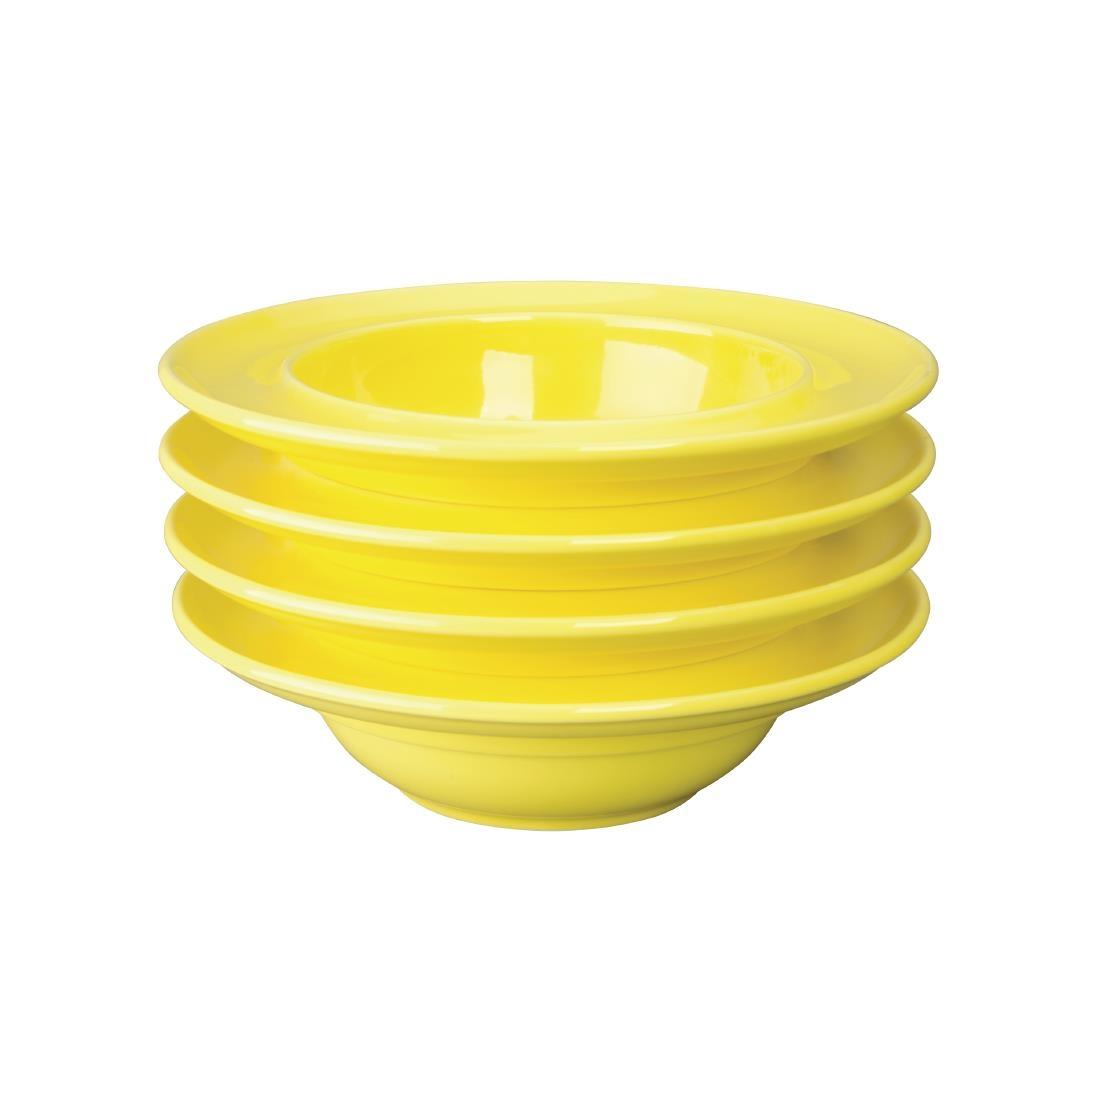 Olympia Heritage Raised Rim Bowls Yellow 205mm (Pack of 4) - DW148  - 4